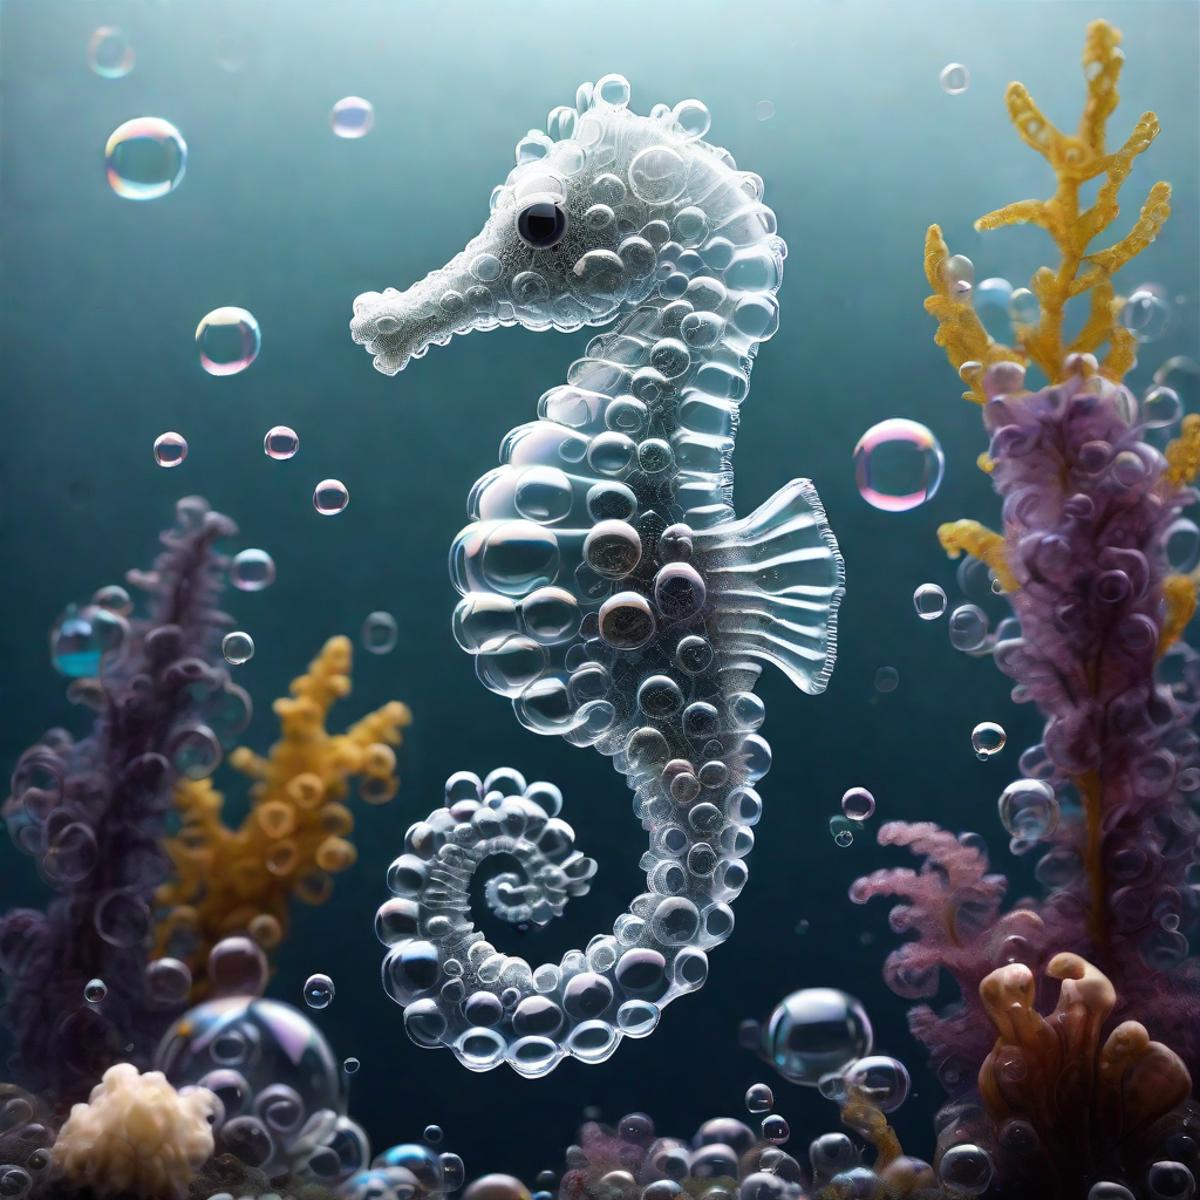 A Sea Horse in an Underwater Environment with Bubbles and Coral